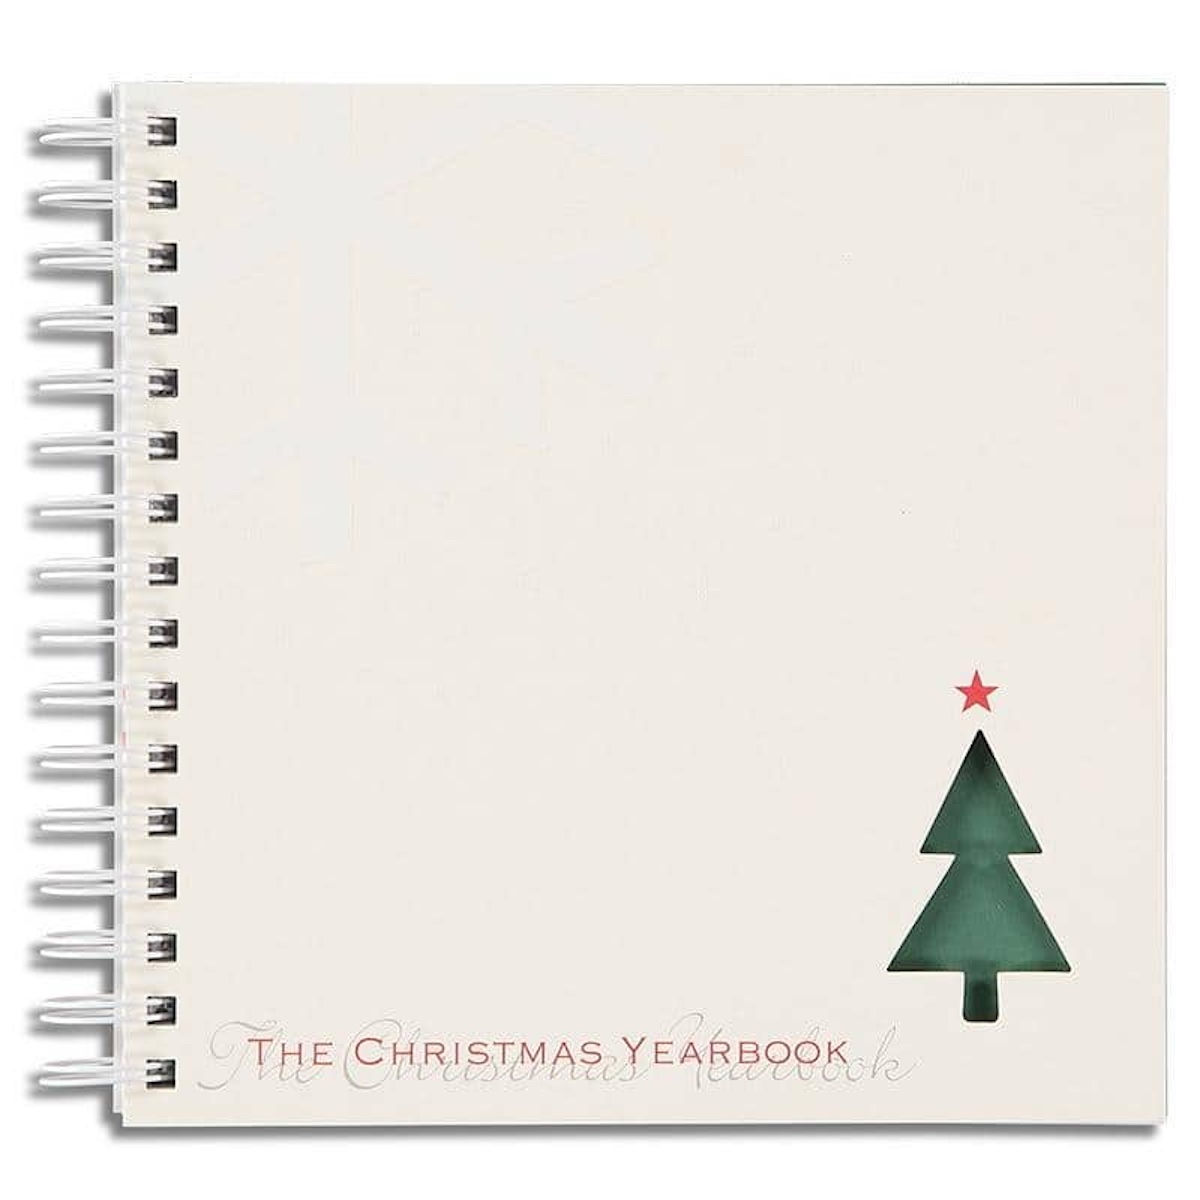 Christmas Yearbook - Journal Your Christmas Memories